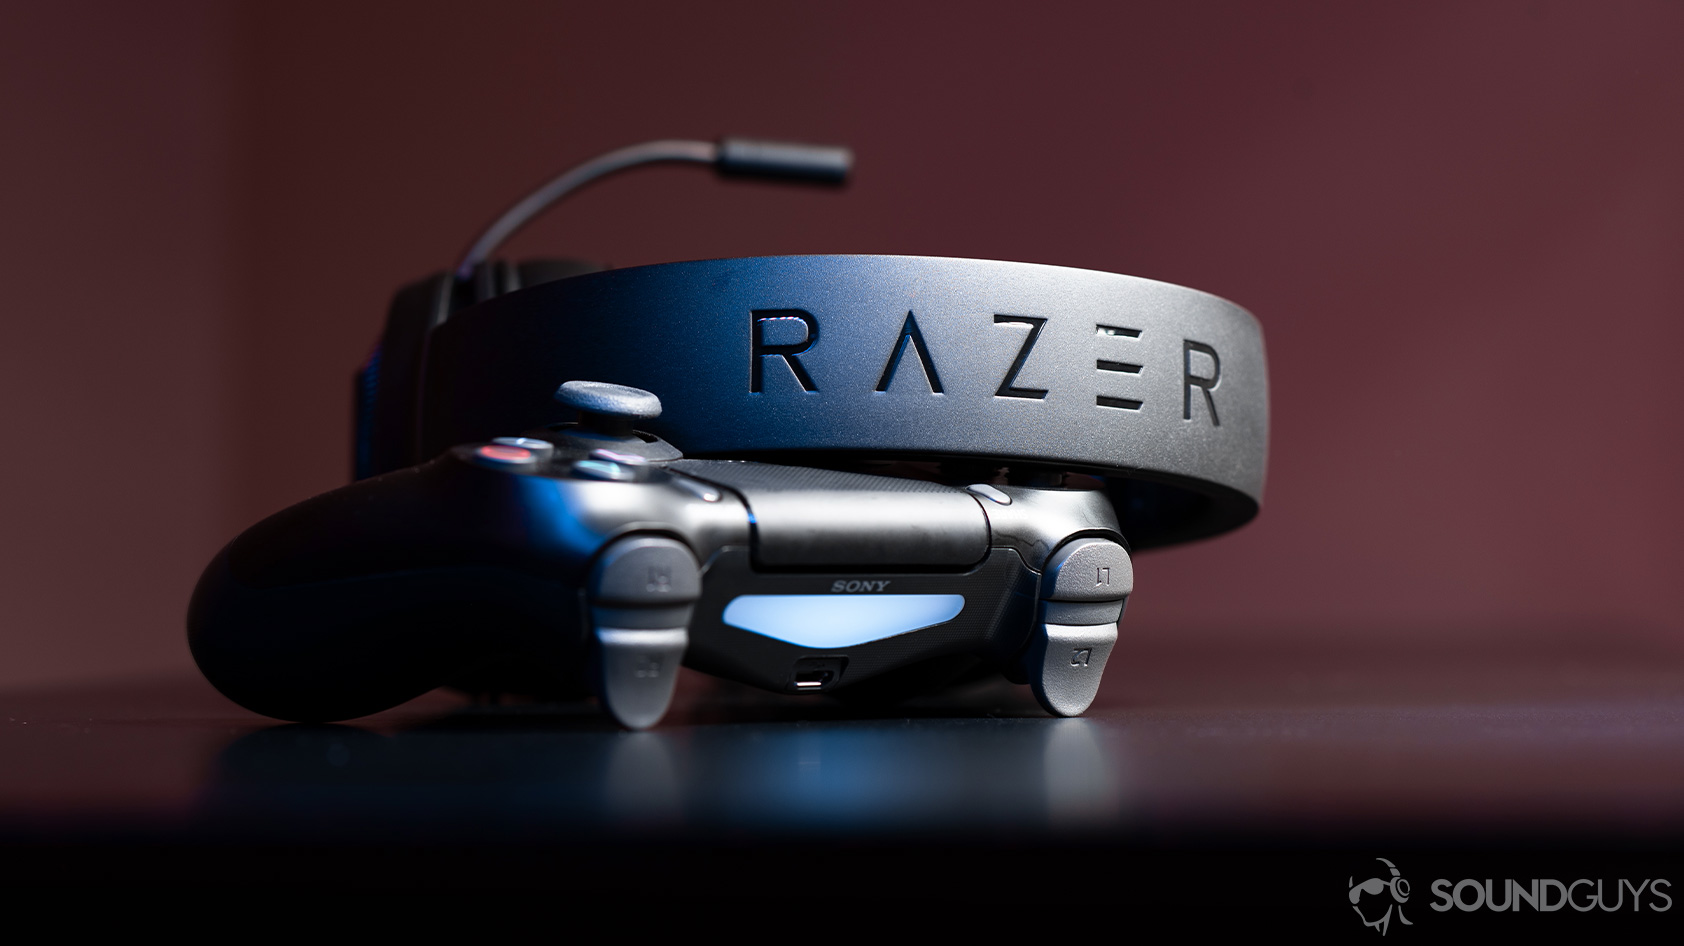 Razer gaming headsets, the Kraken X leaning against a PS4 controller with the headband facing the lens to show the Razer logo.